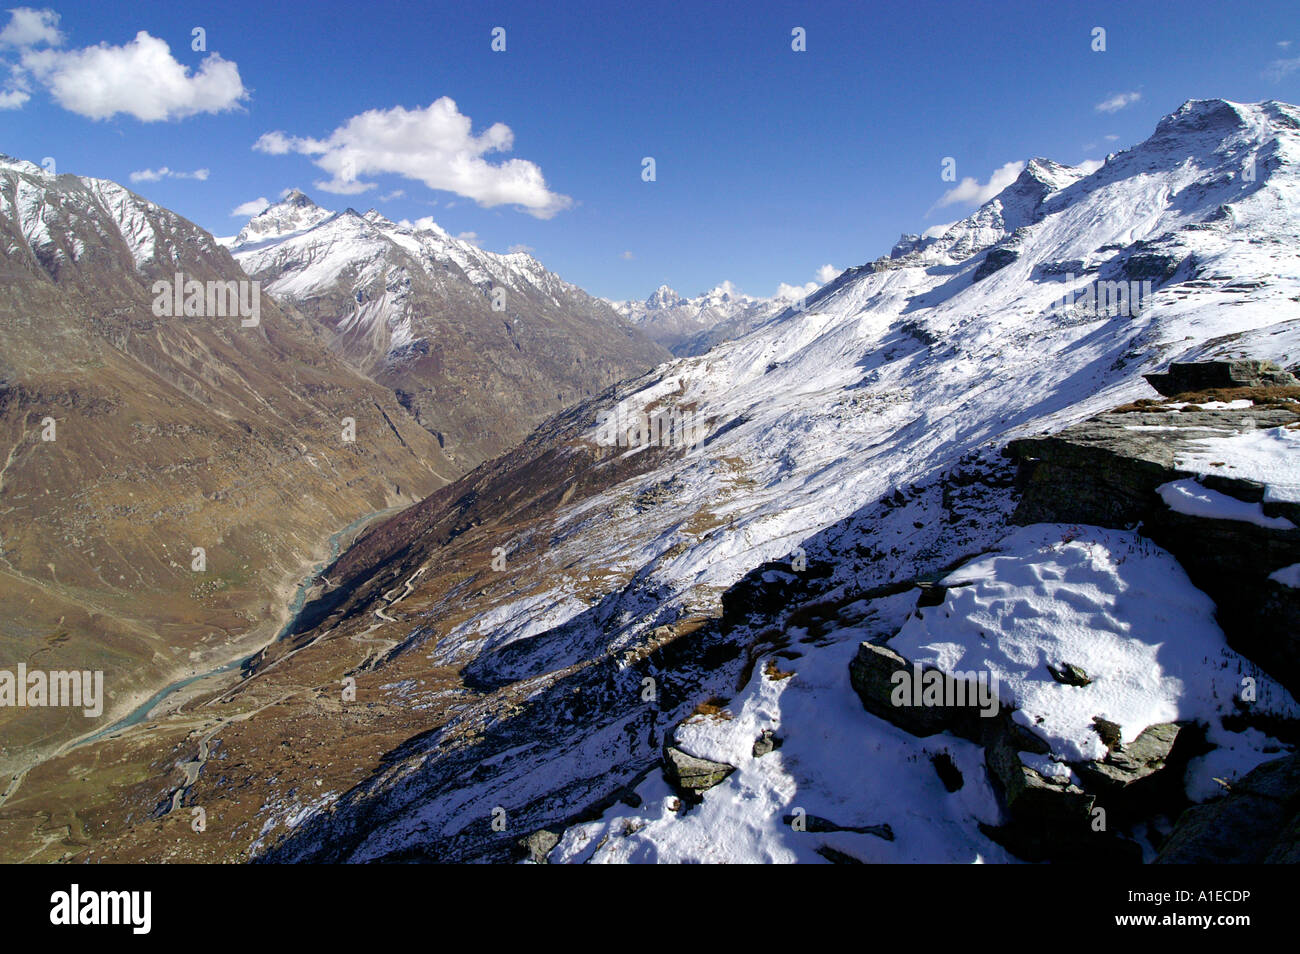 Snow covered peaks of Indian Himalaya Lahaul district above Lahaul Valley from Rohtang Pass Stock Photo